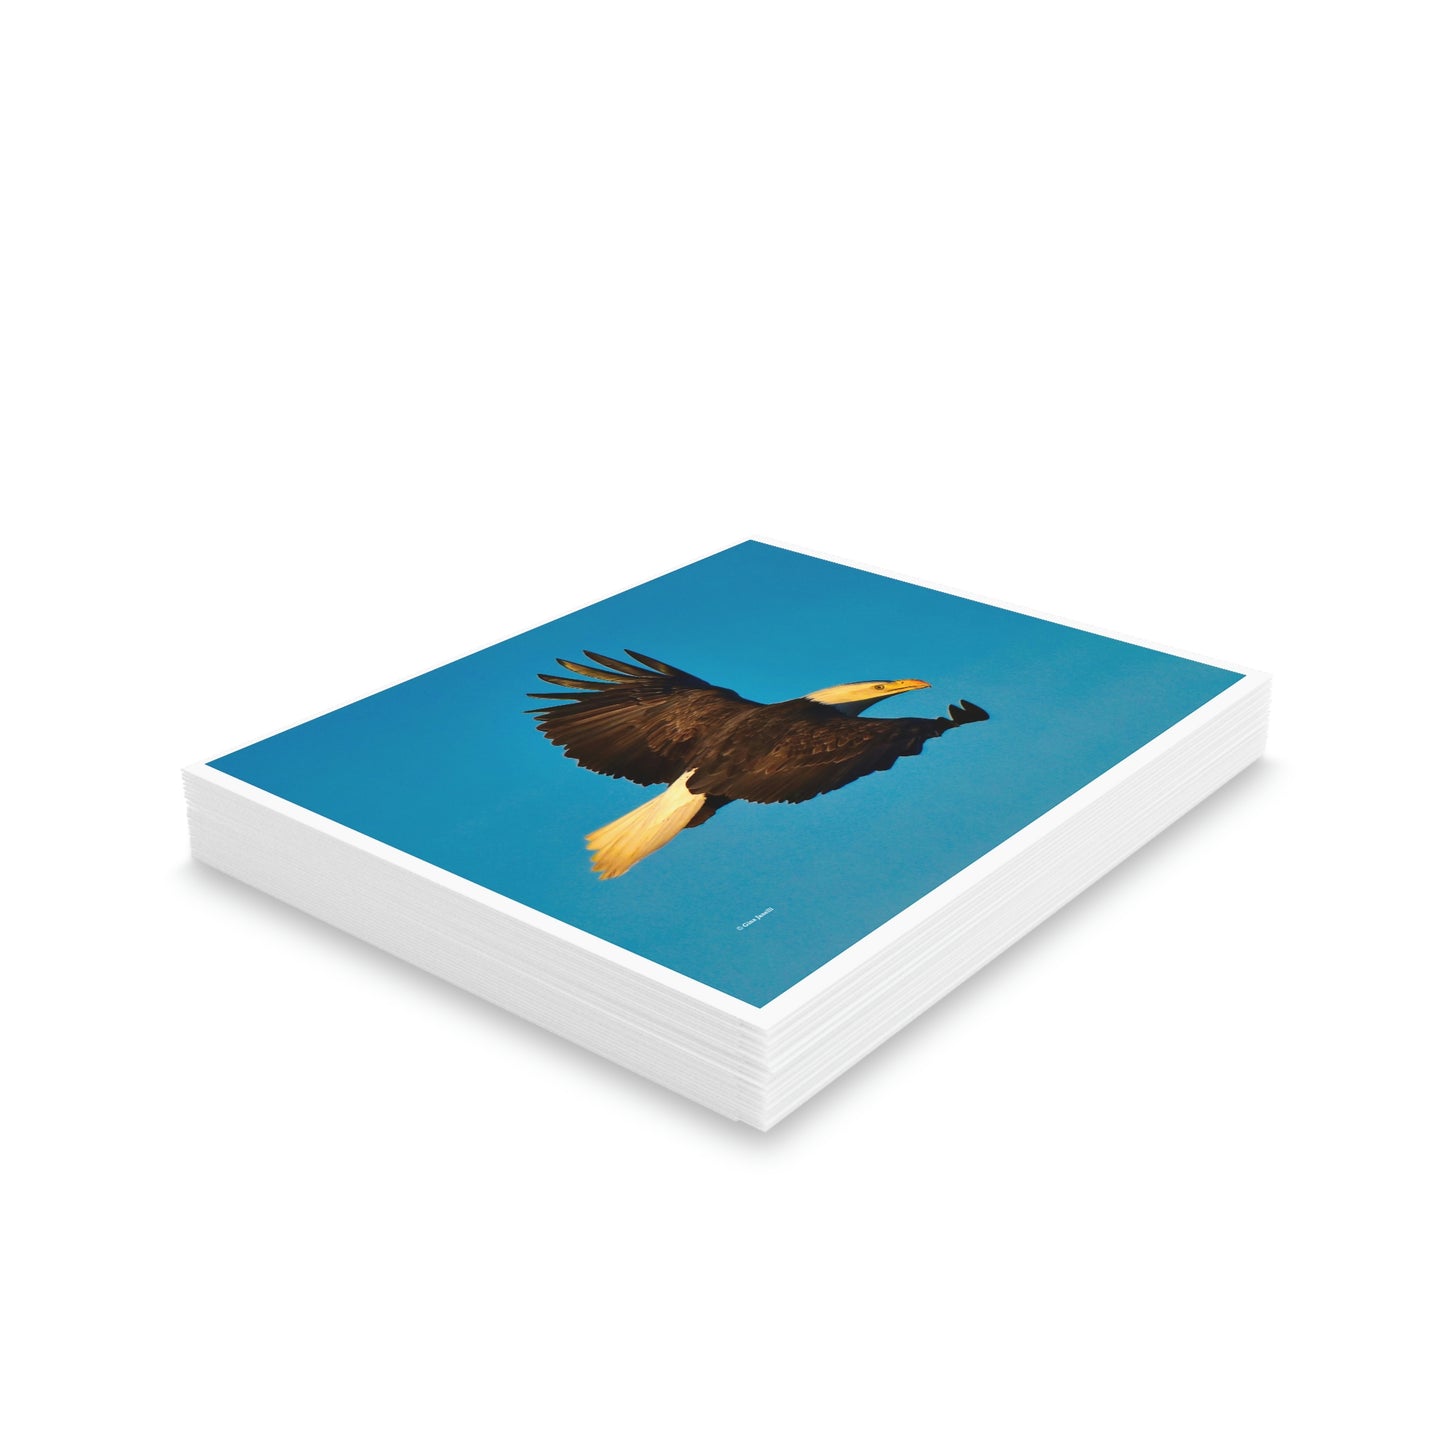 Bald Eagle Greeting cards (8, 16, and 24 pcs)